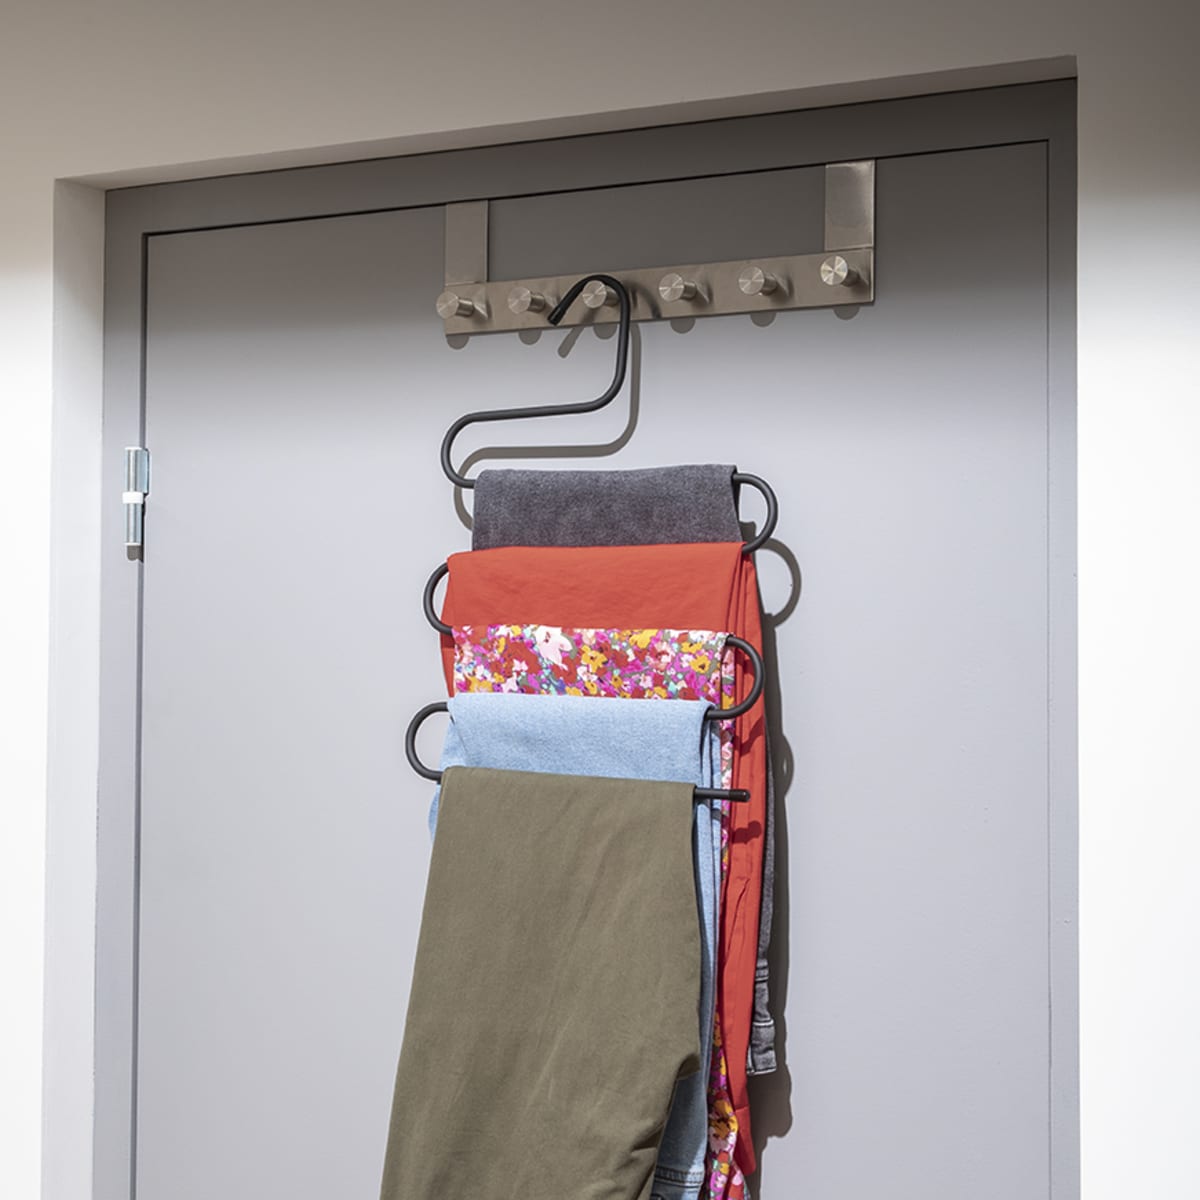 SPACEO SPACE-SAVING SOFT TOUCH NON-SLIP HANGER FOR 5 TROUSERS